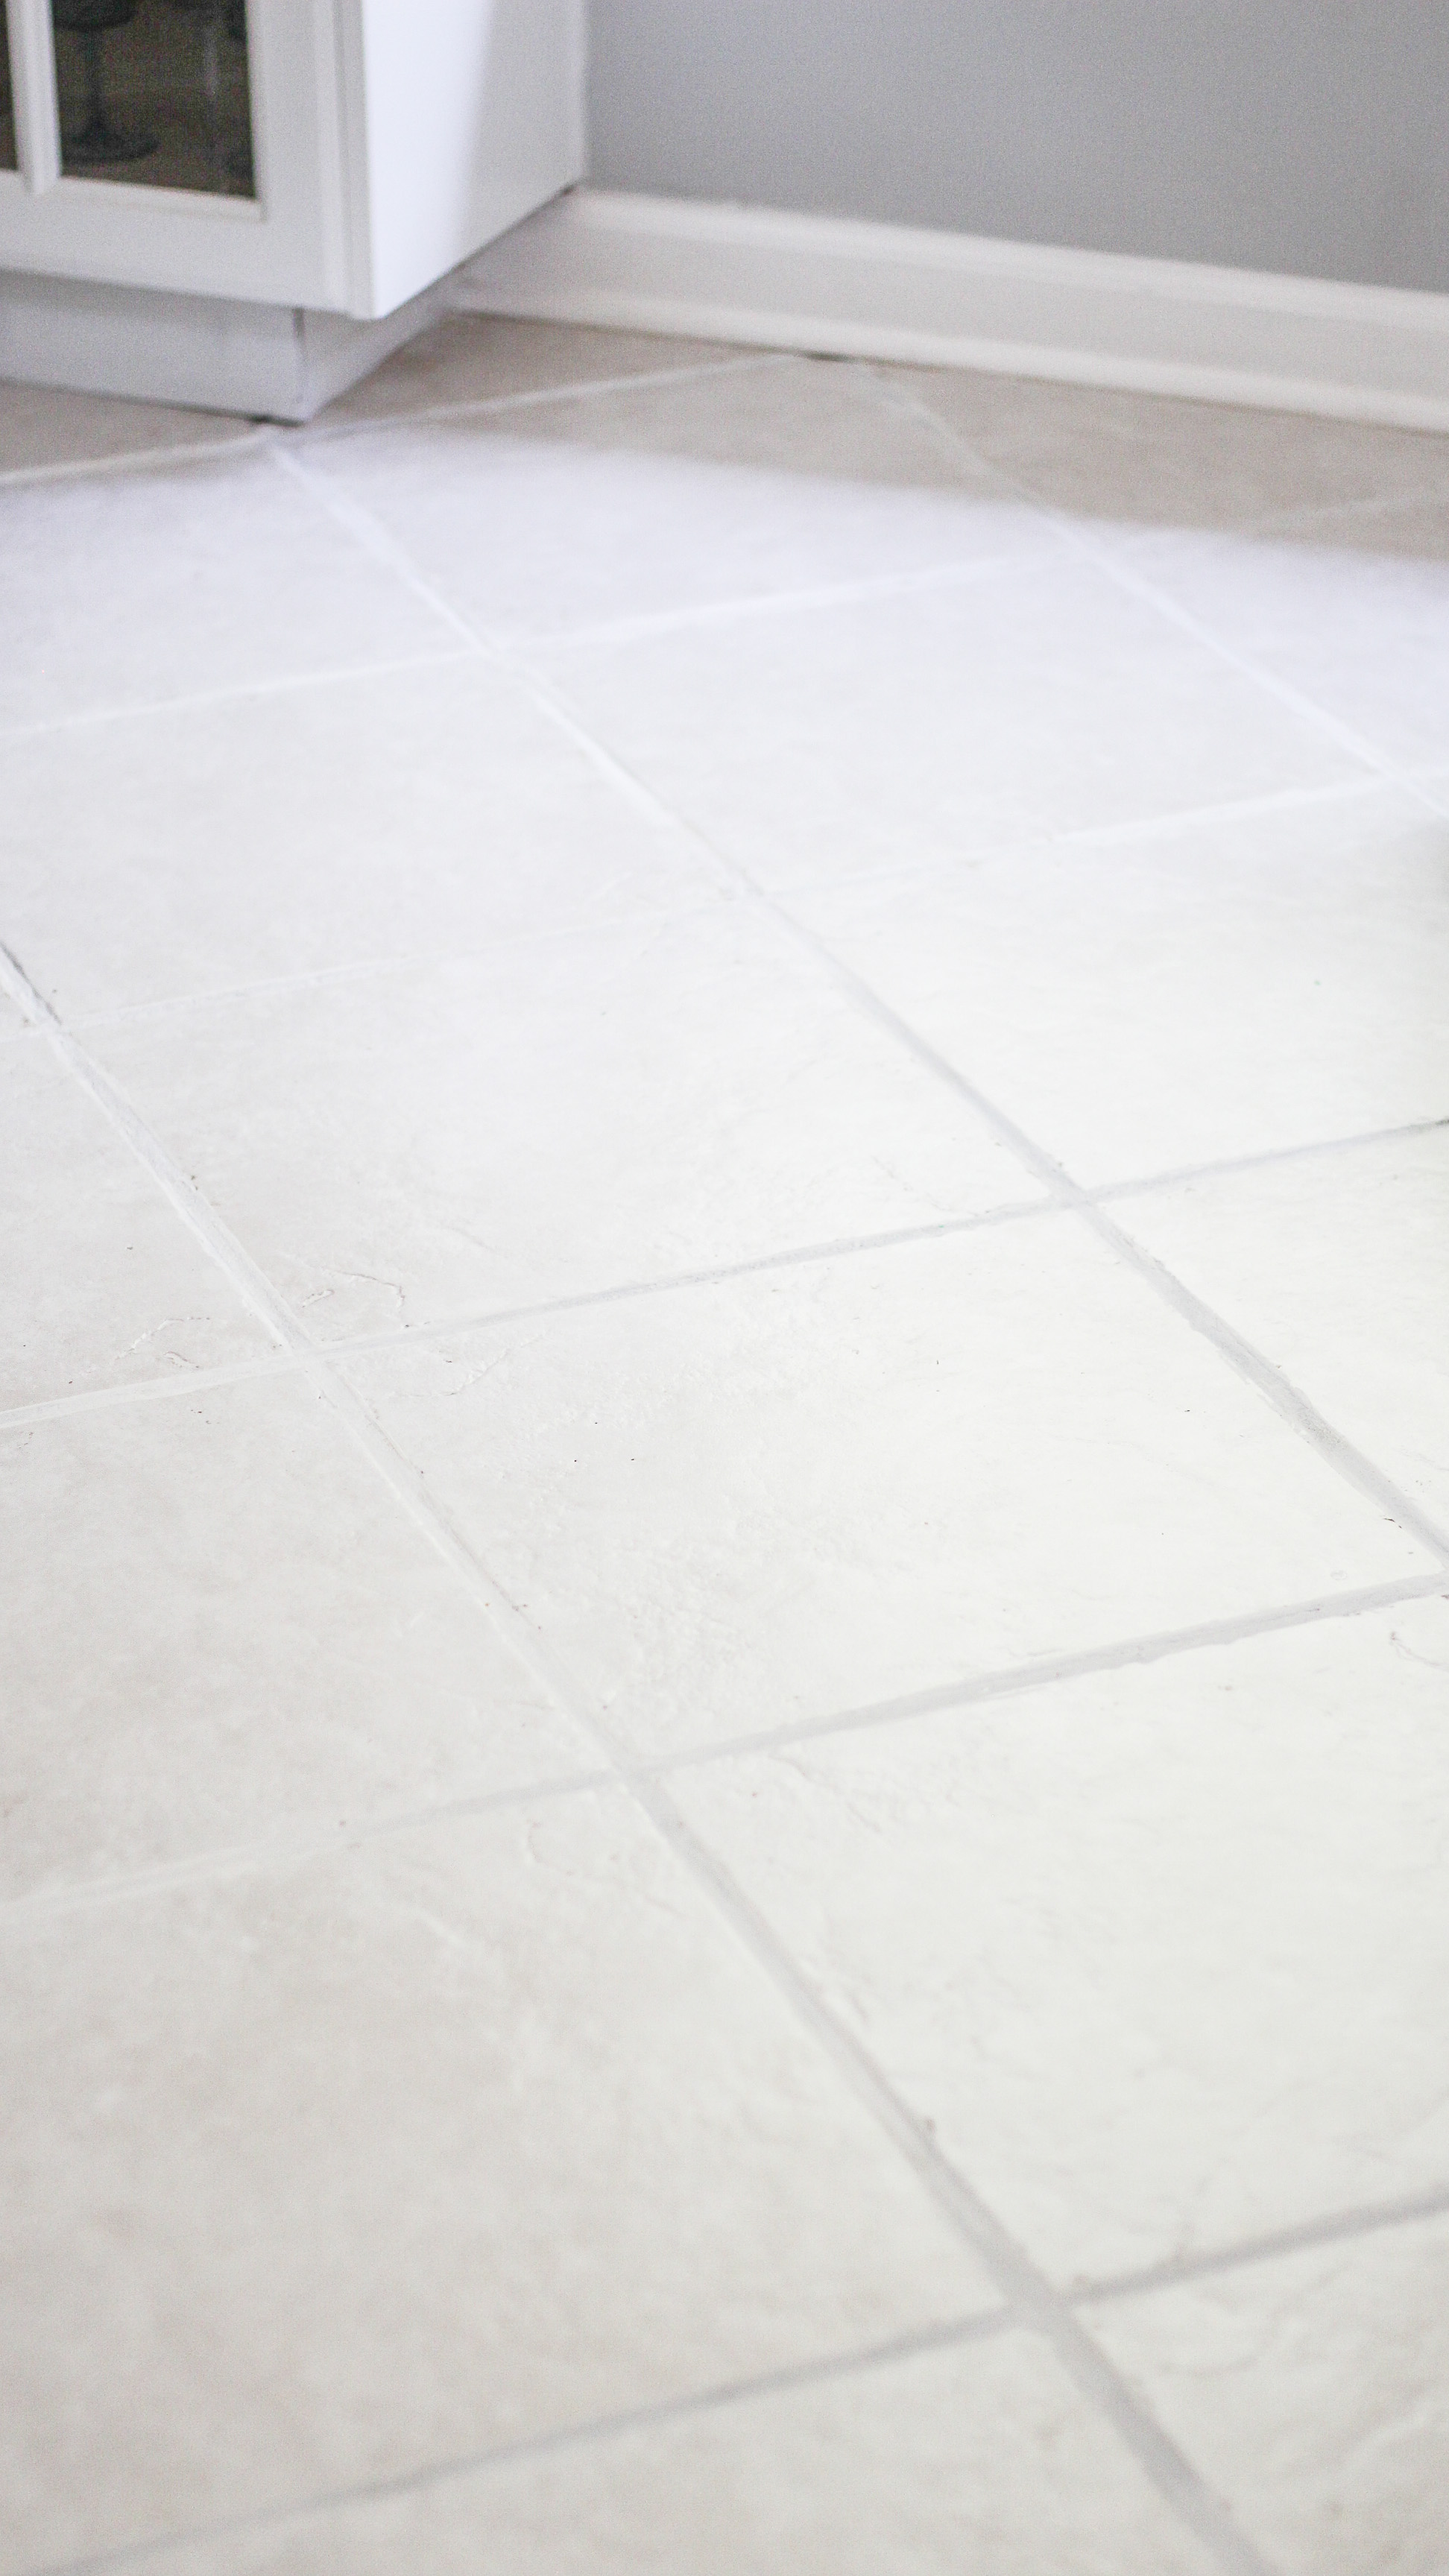 Neglected Tile Flooring, How To Clean Ceramic Tile Floors And Grout